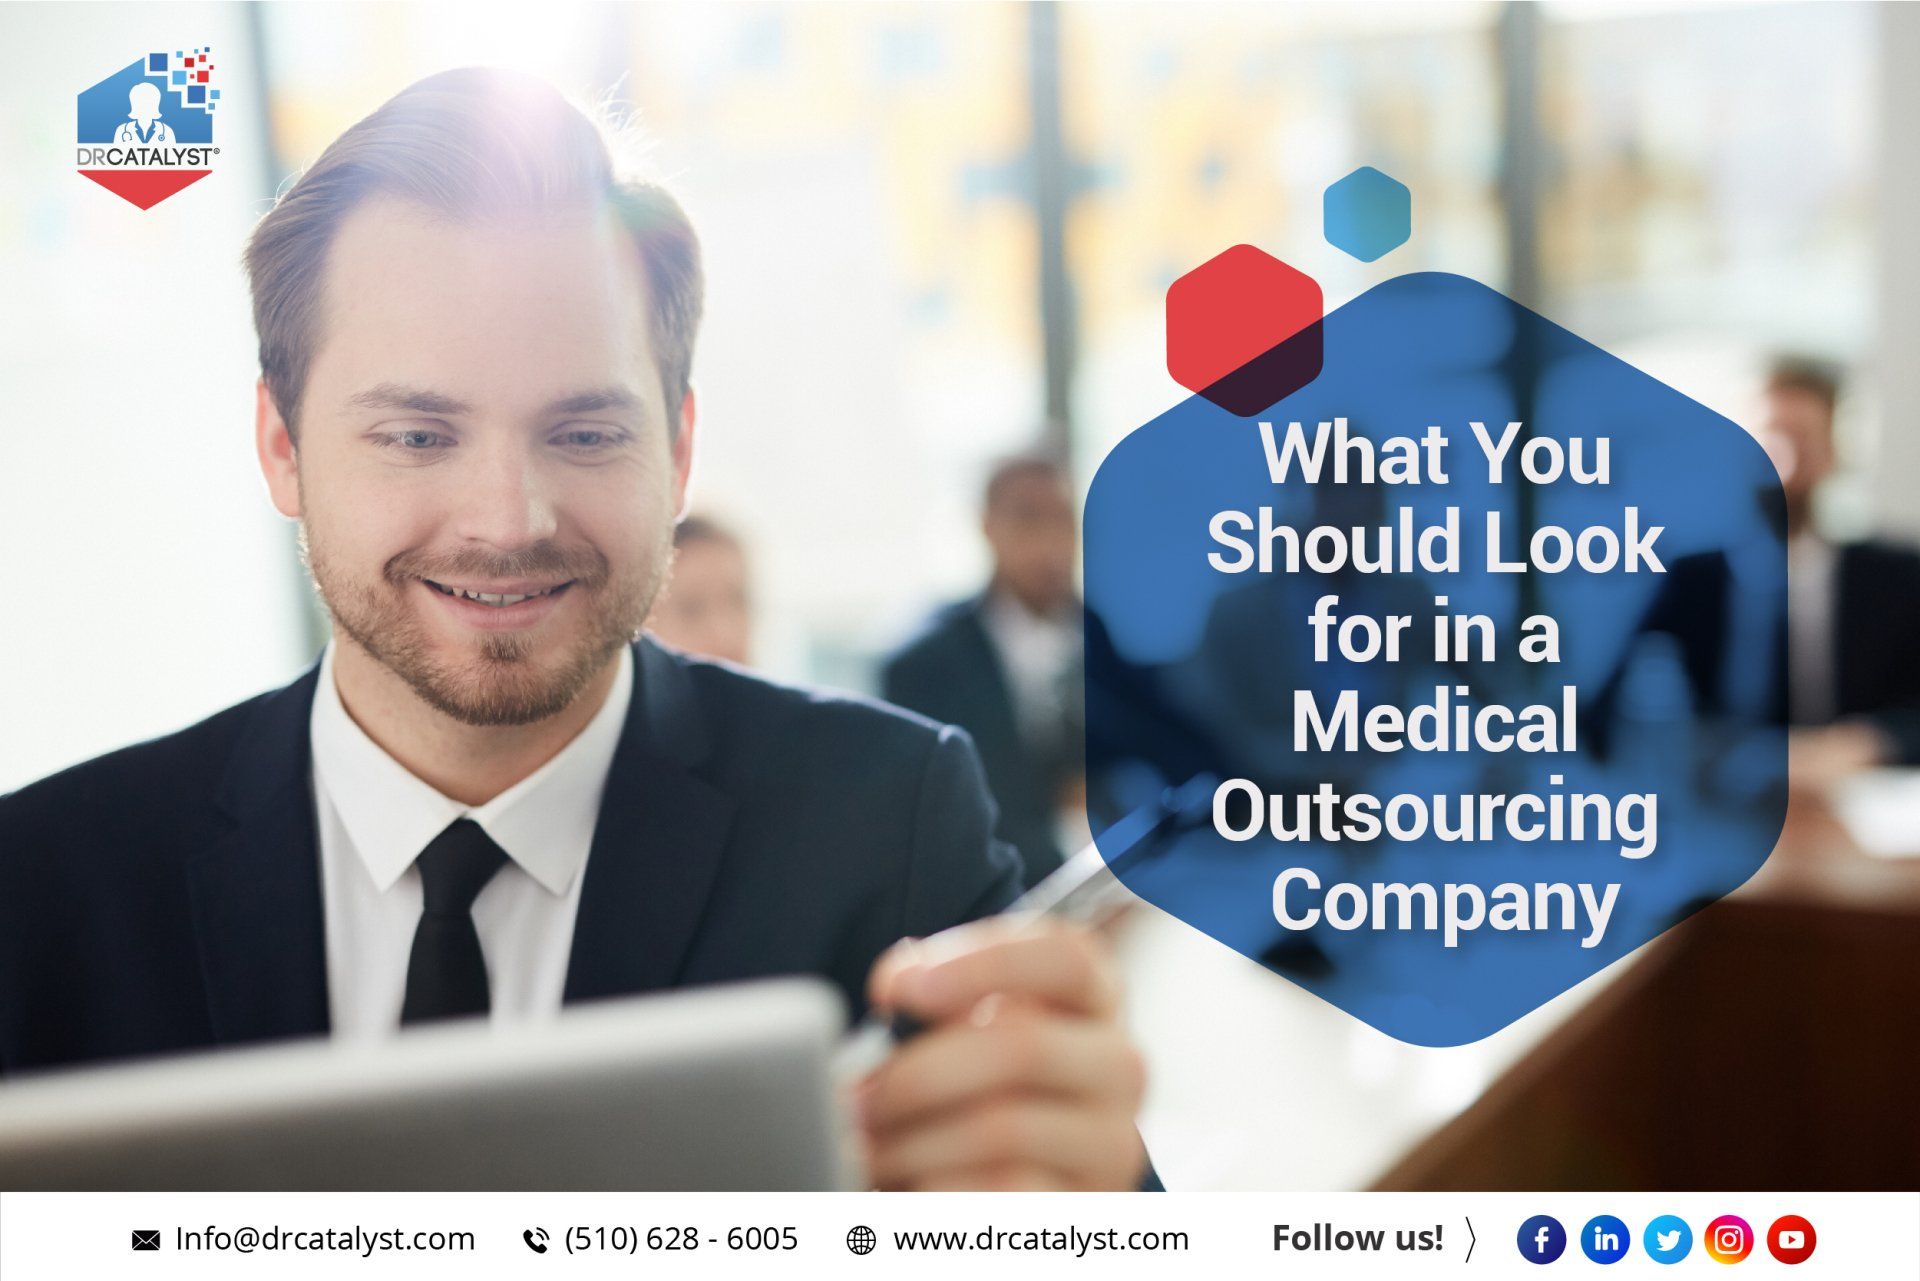 Looking for a Medical Outsourcing Company